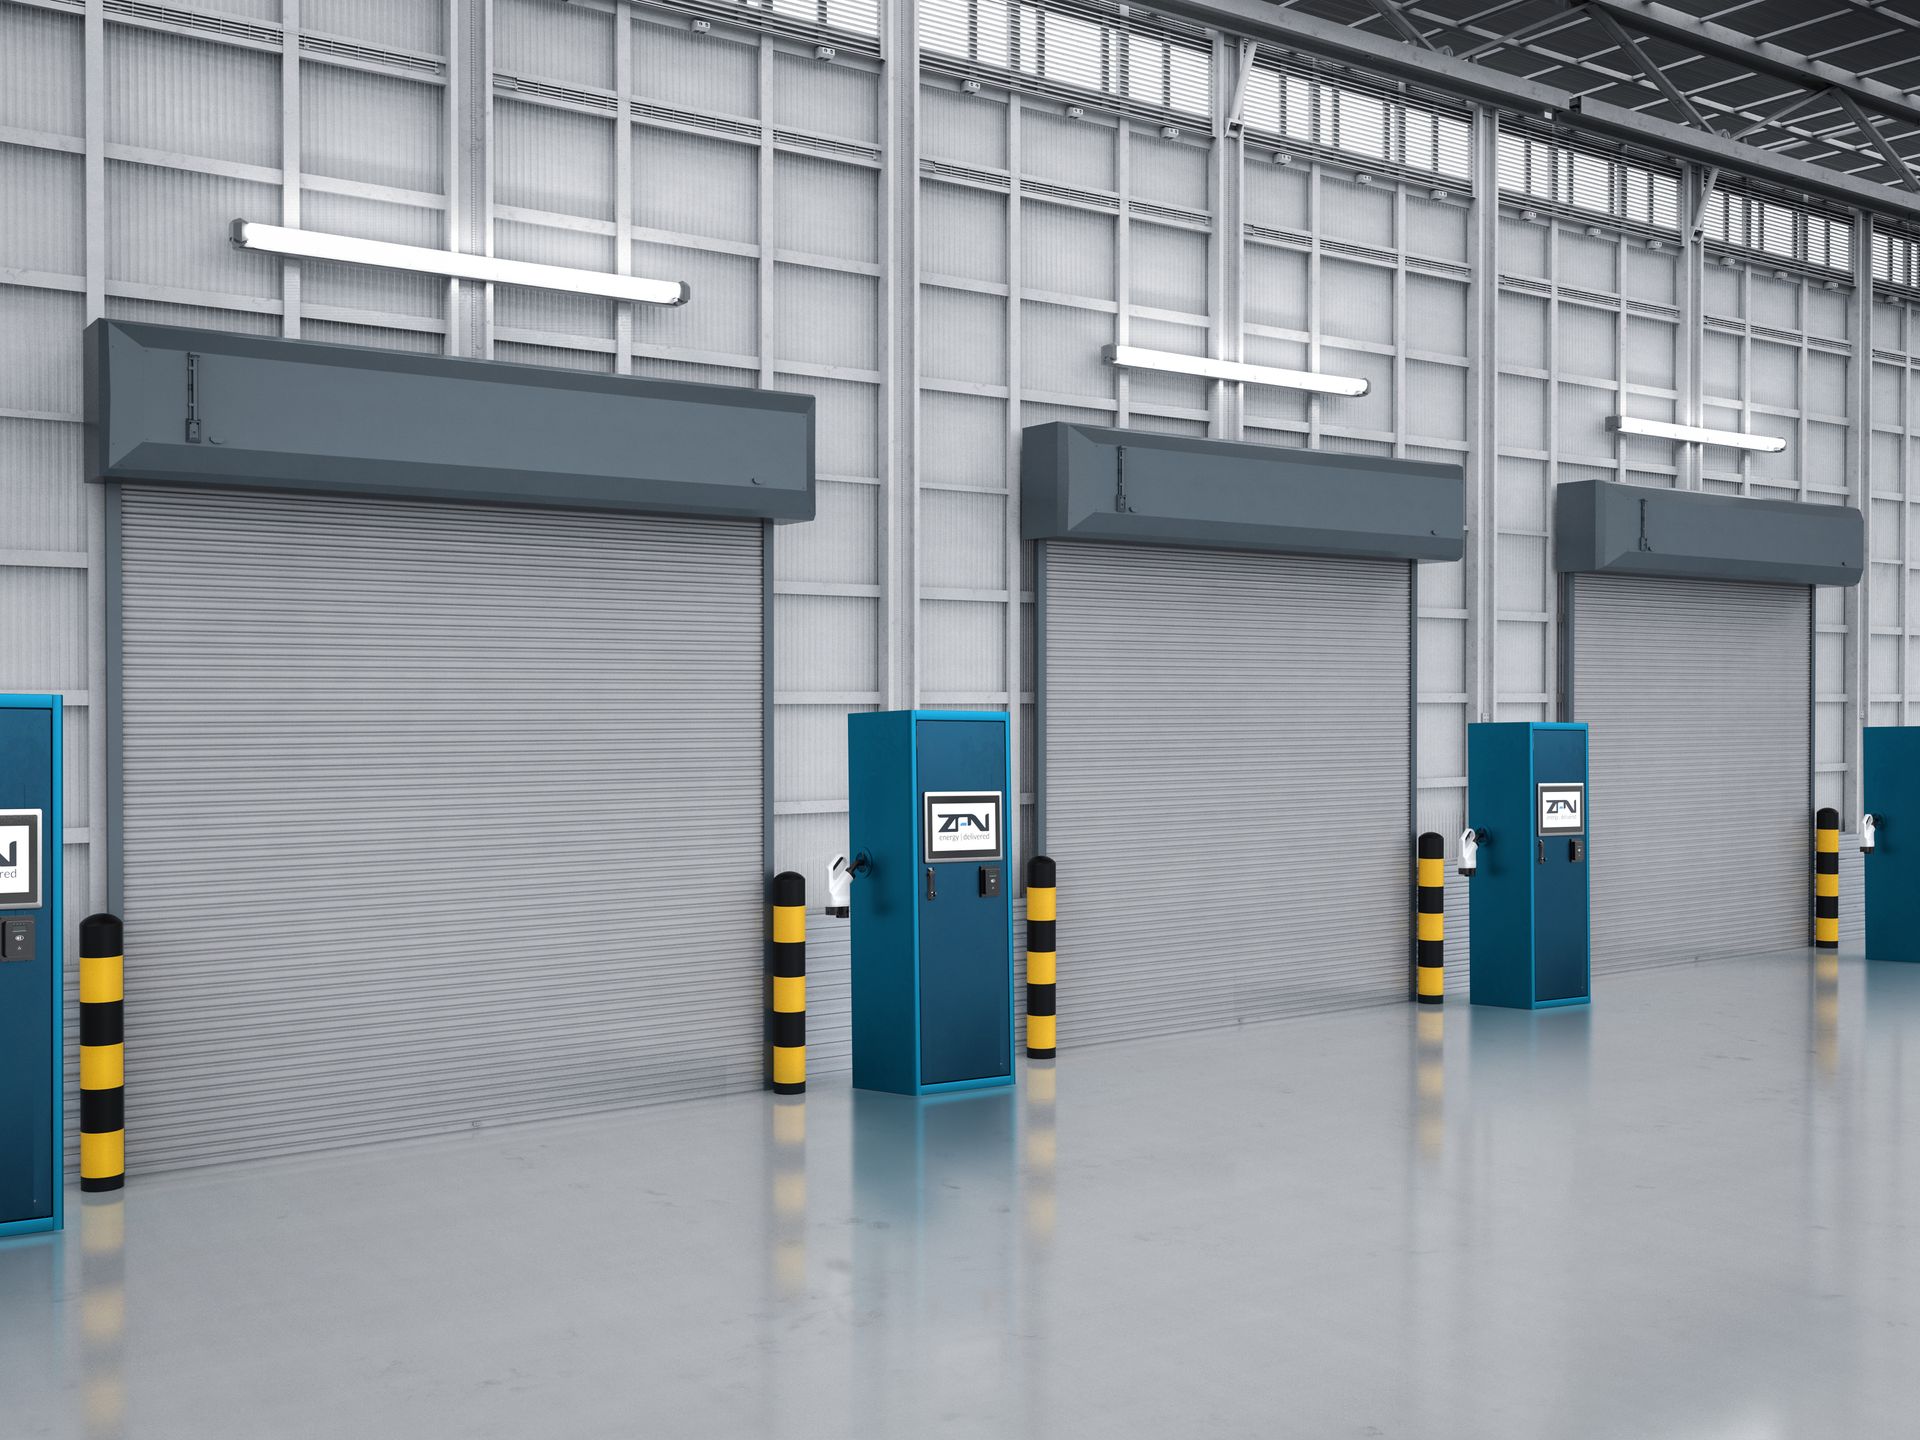 A warehouse with a row of roller shutter doors aligned with zpn hubz rapid ev charger 